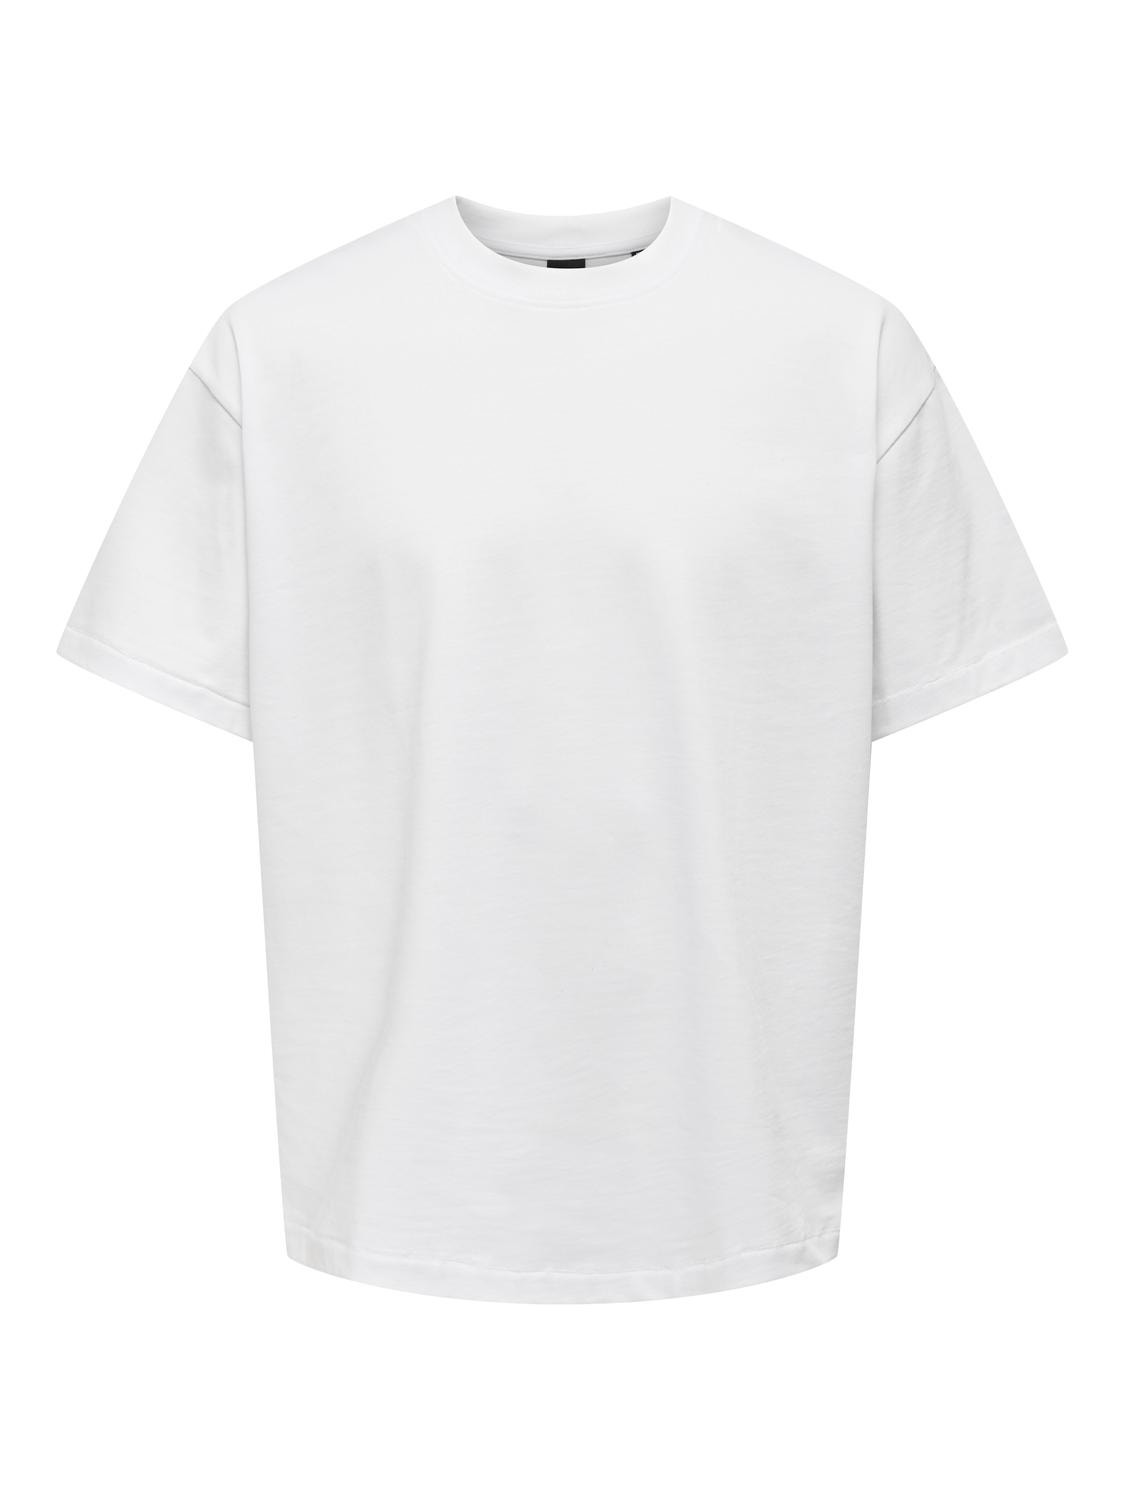 ONLY & SONS Oversized Fit O-hals T-skjorte -Bright White - 22027787